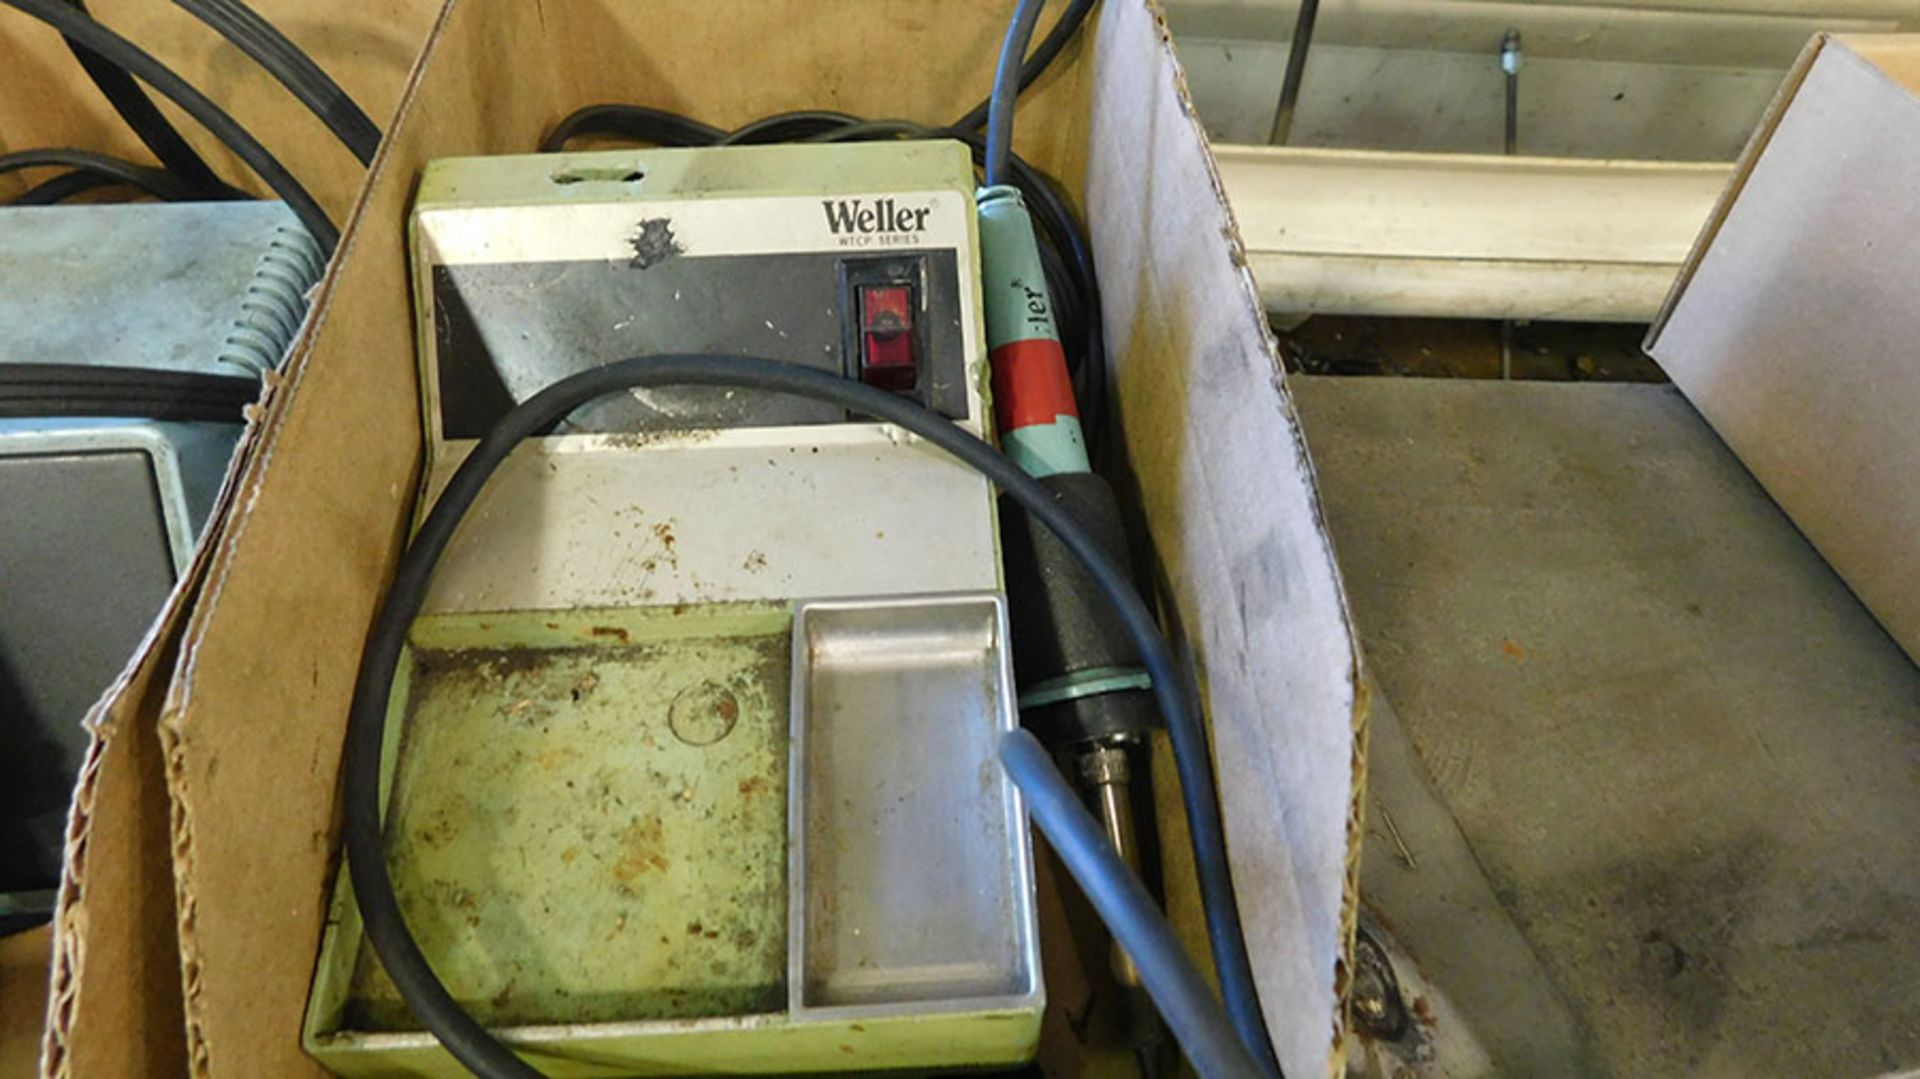 WELLER POWER UNIT WITH SOLDERING PENCIL